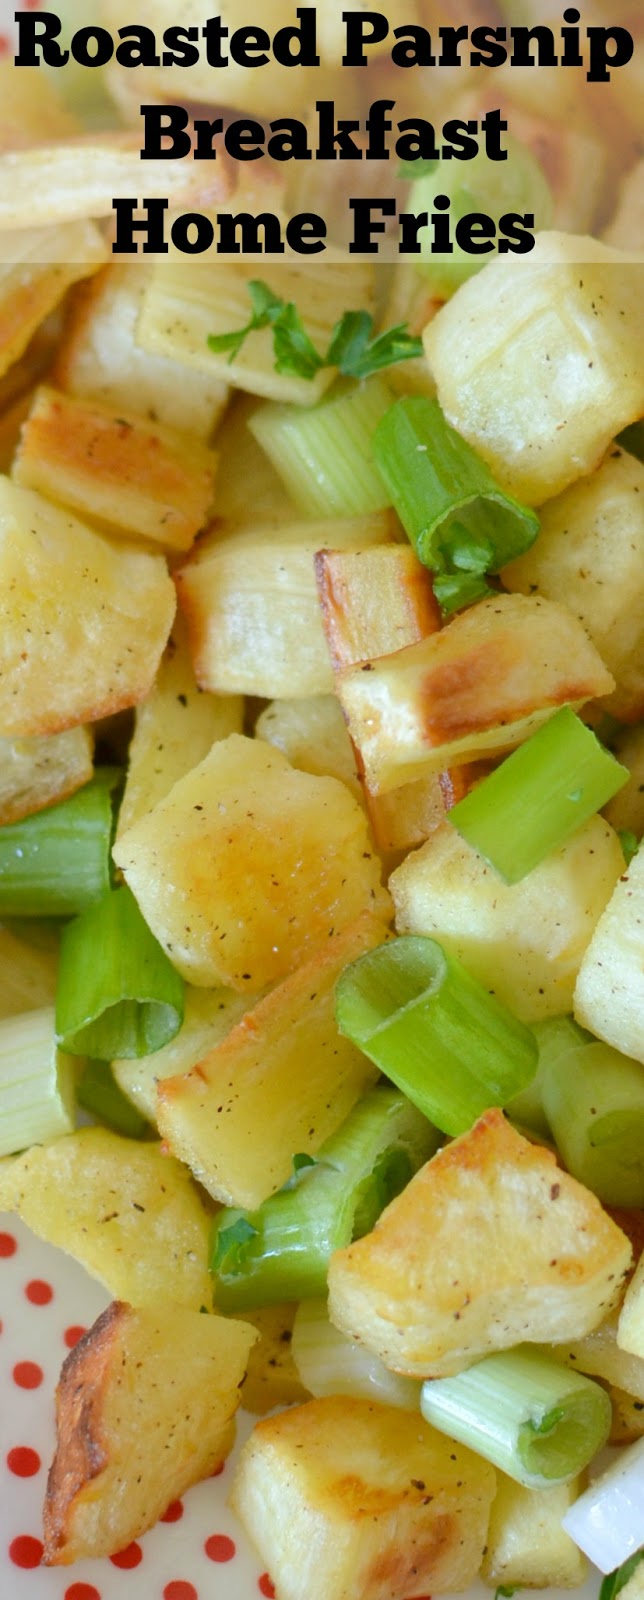 Roasted Parsnip Breakfast Home Fries Recipe from Hot Eats and Cool Reads! This breakfast or dinner side dish is unique, delicious and so simple to make! The freshness of the green onions go great with the roasted parsnips!